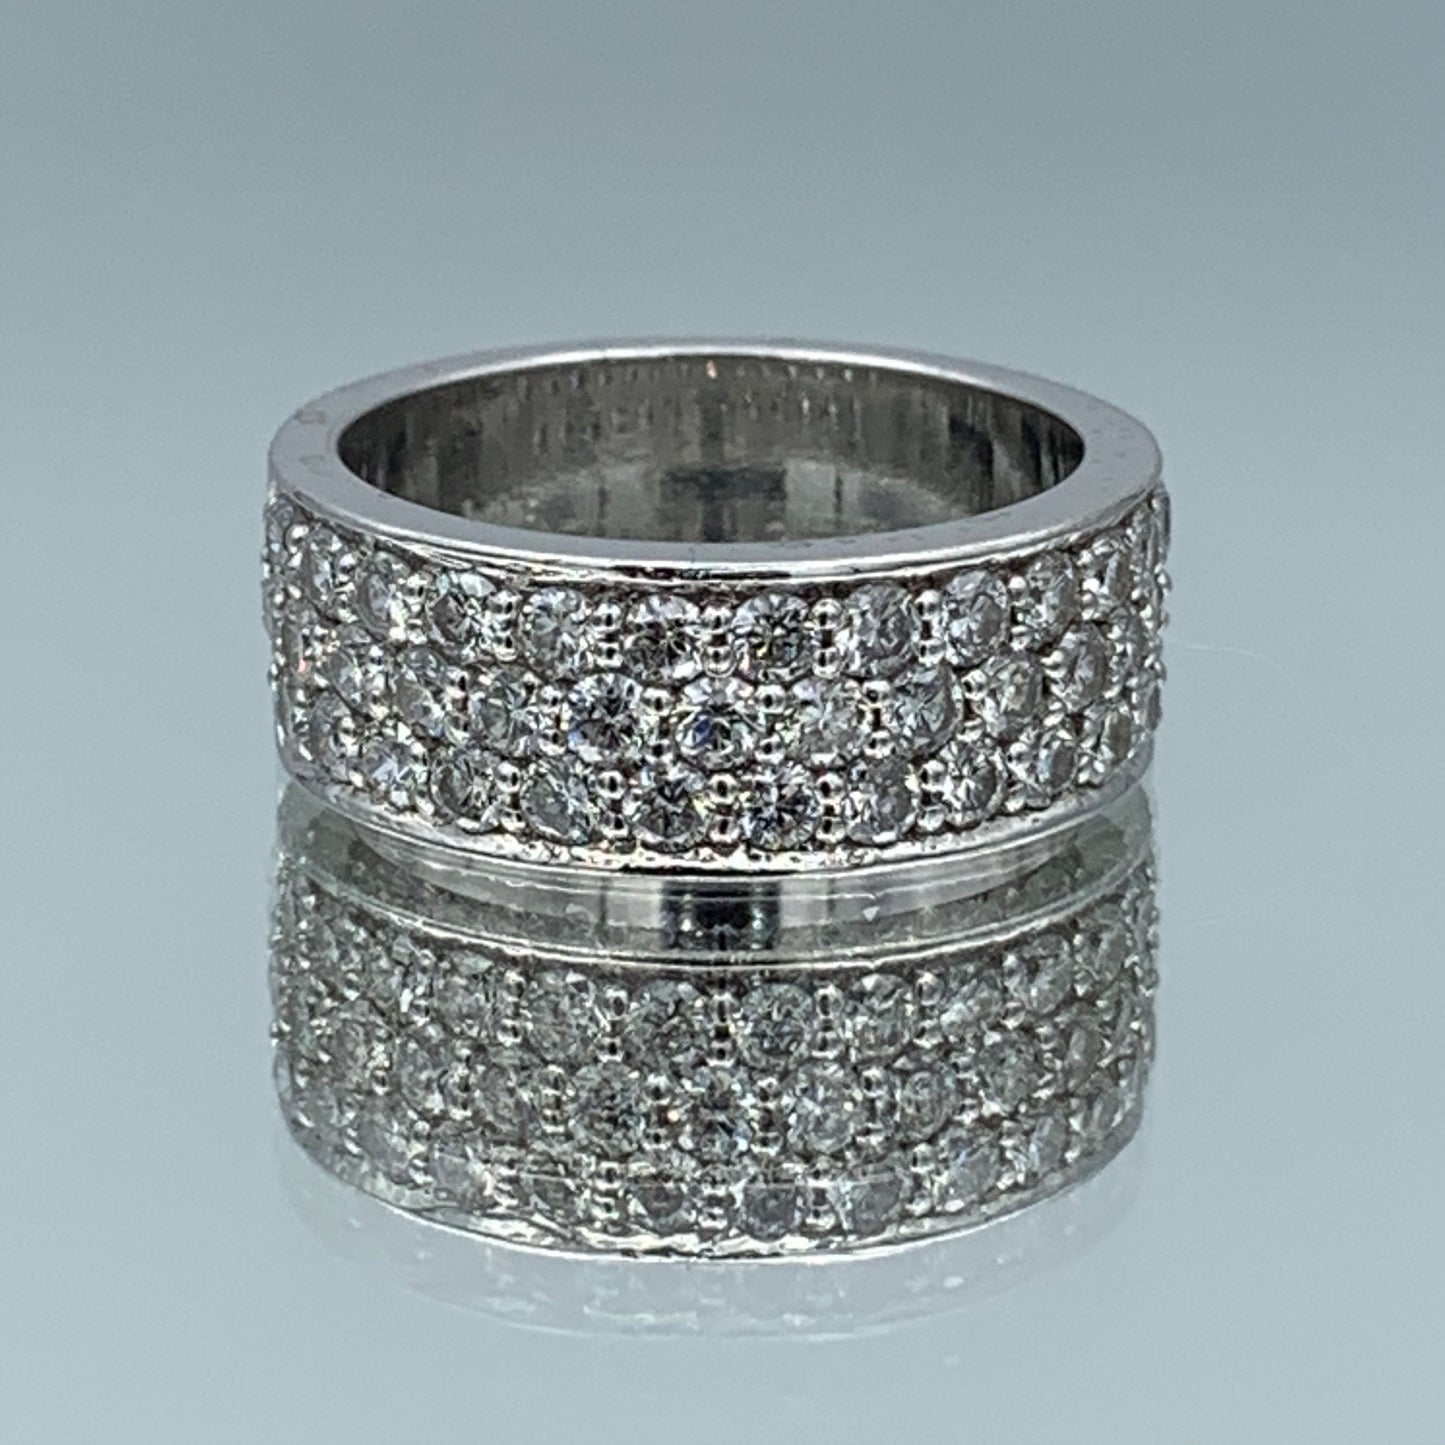 French Pave Set Diamond Ring in 14K White Gold - L and L Jewelry